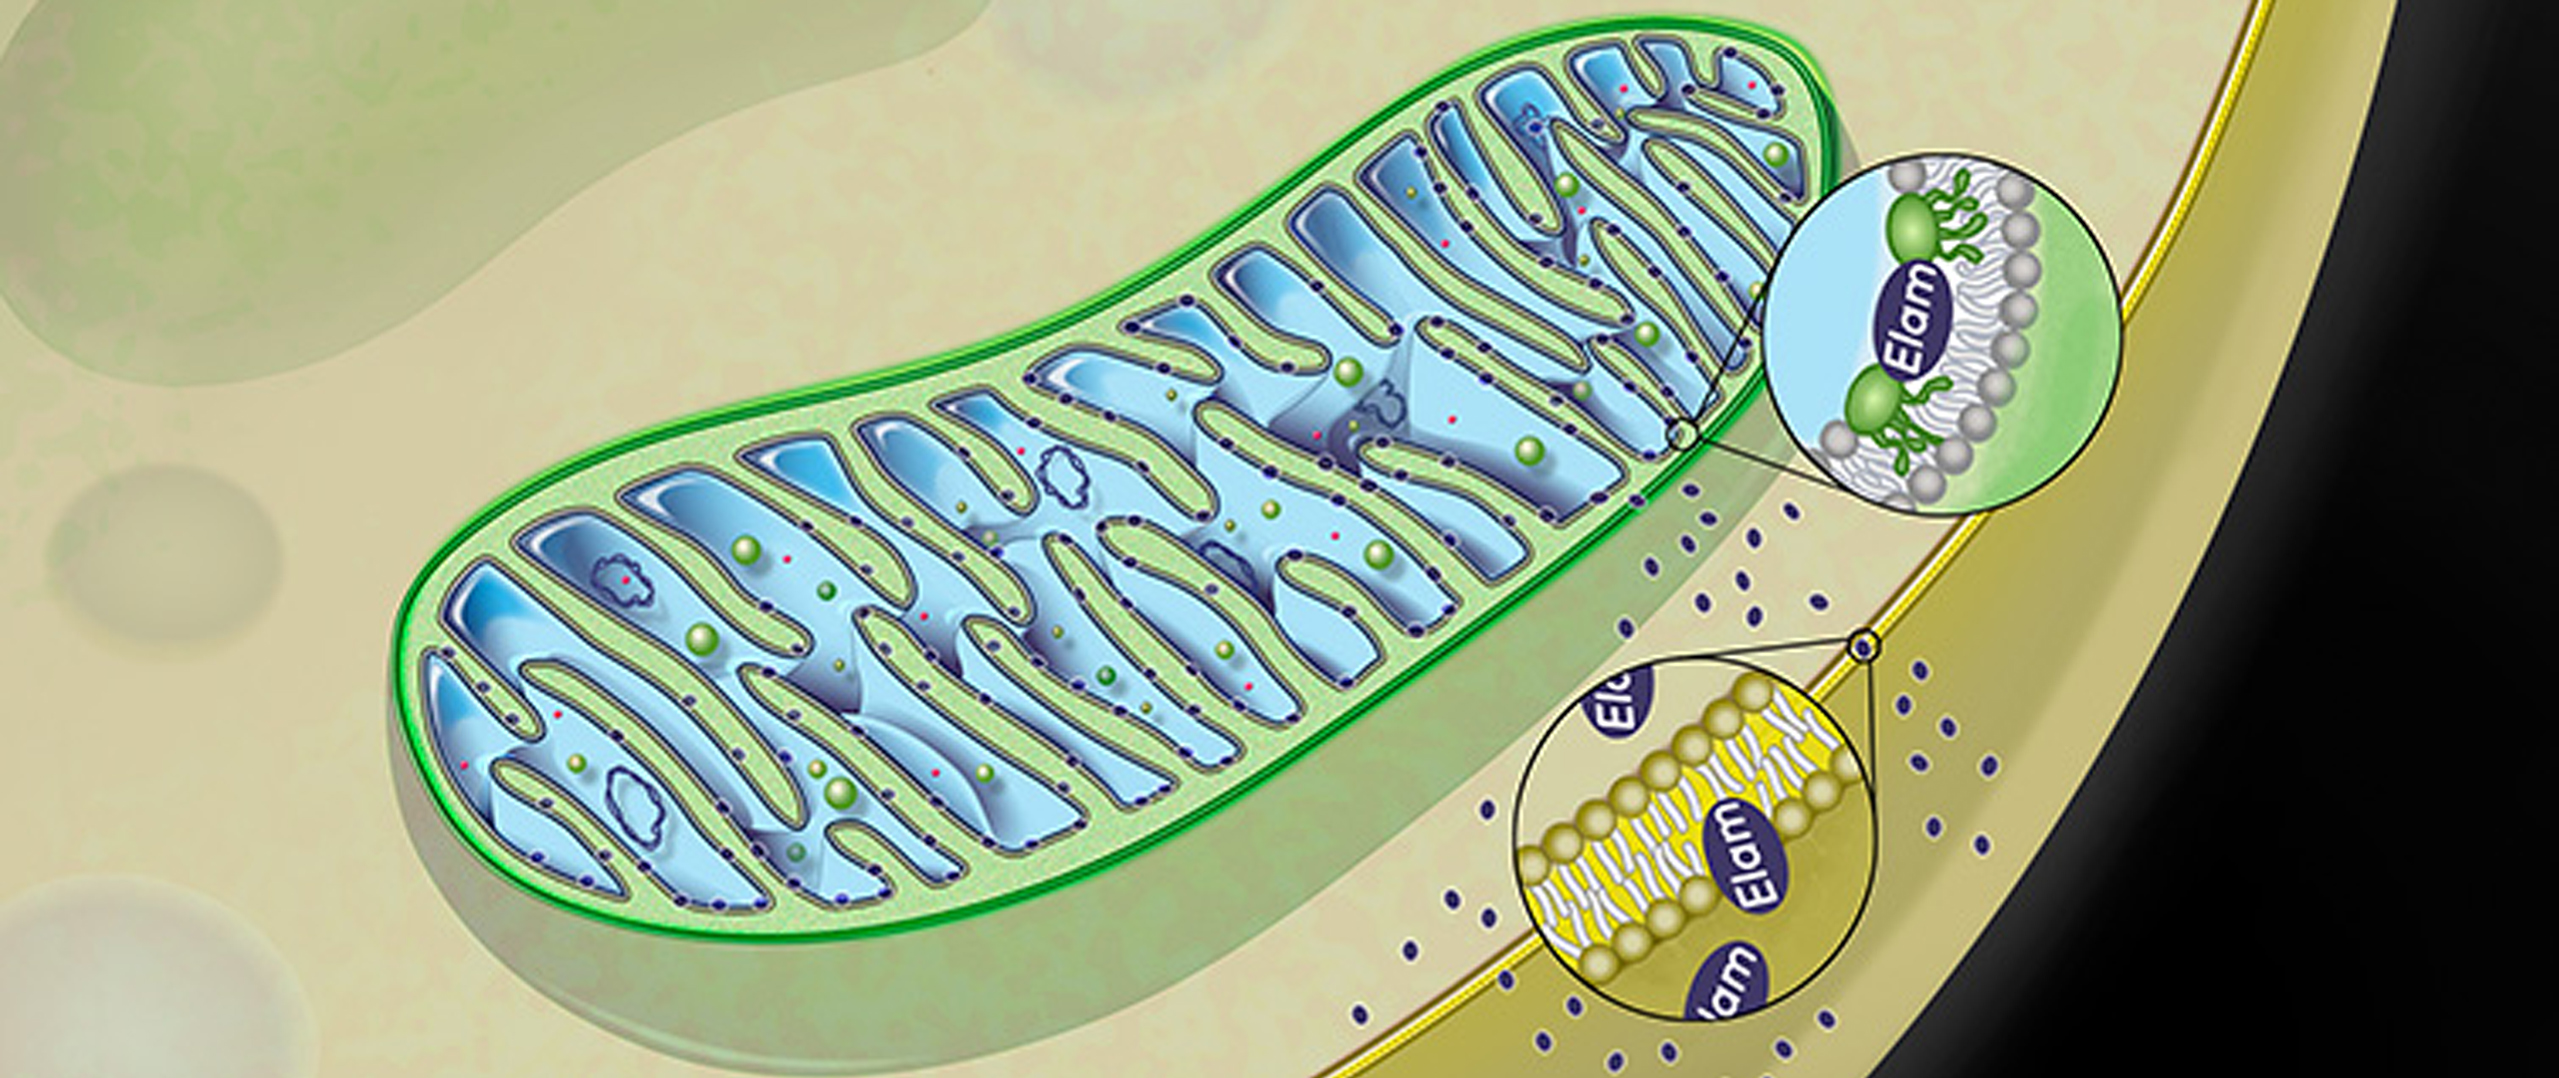 Schematic of Elamipretide’s penetration of mitochondrial membrane. Source: Stealth BioTherapeutics.